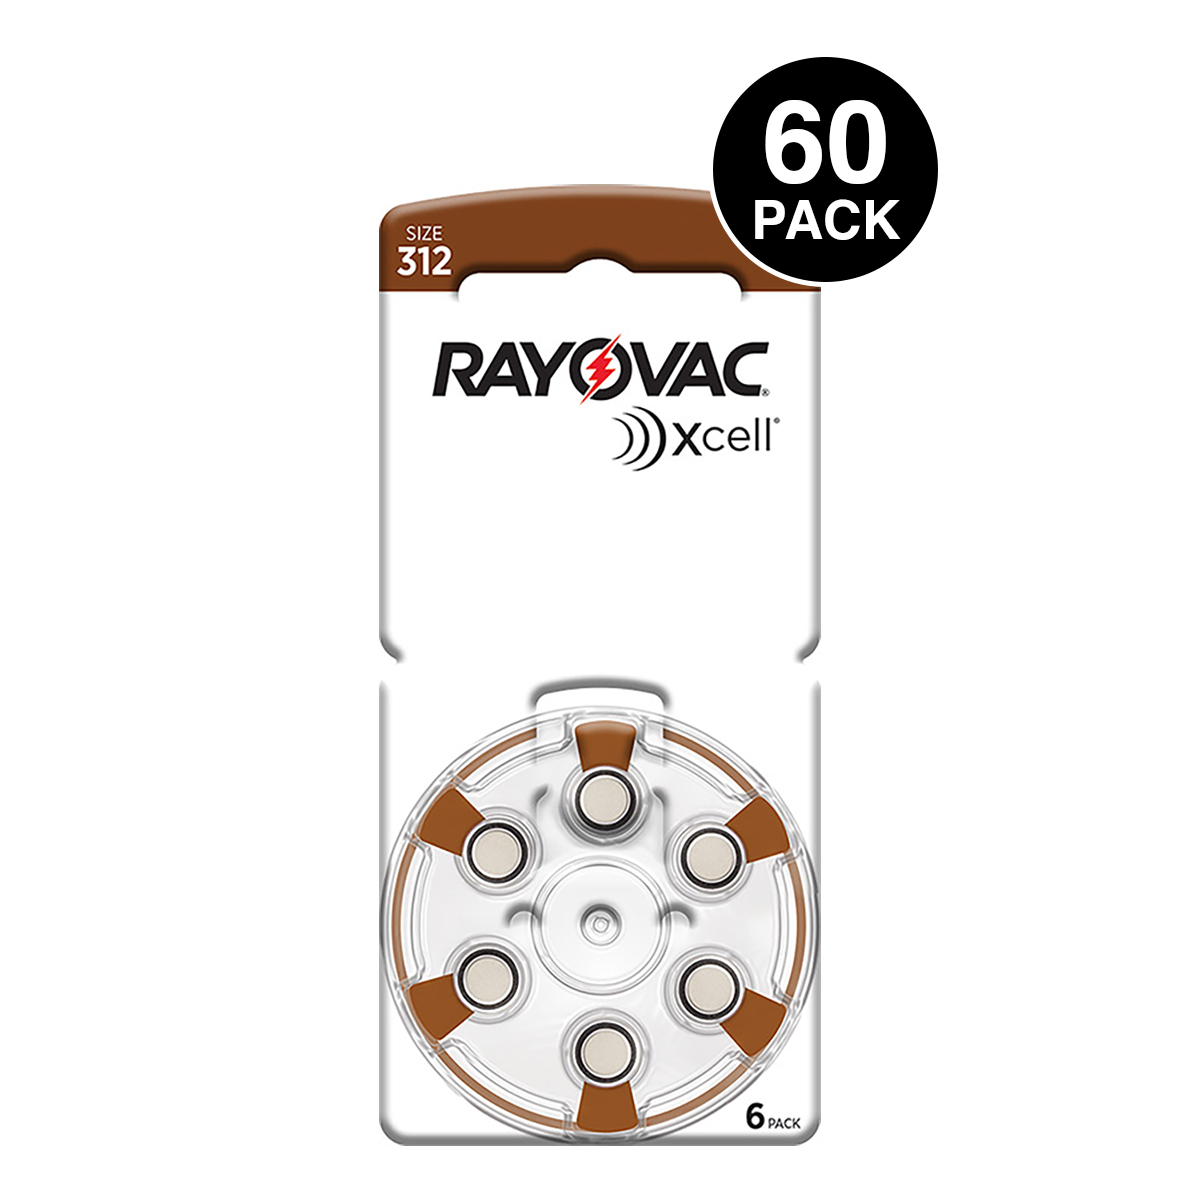 Xcell (Made By Rayovac) Size 312 Hearing Aid Batteries (60 Pcs)